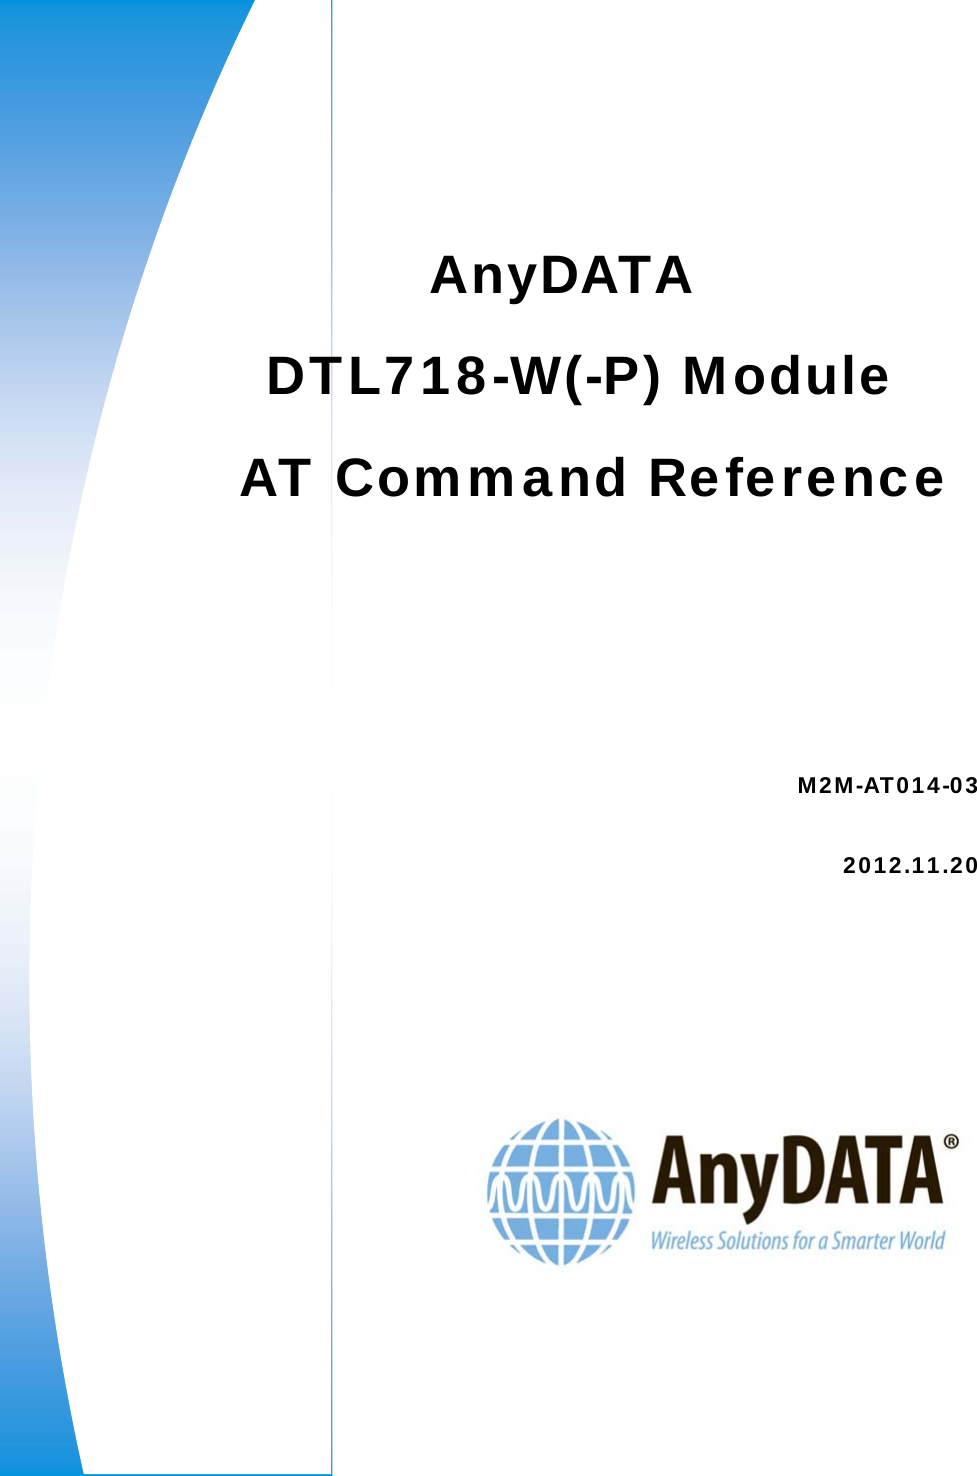    AnyDATA DTL718-W(-P) Module    AT Command Reference M2M-AT014-03 2012.11.20 